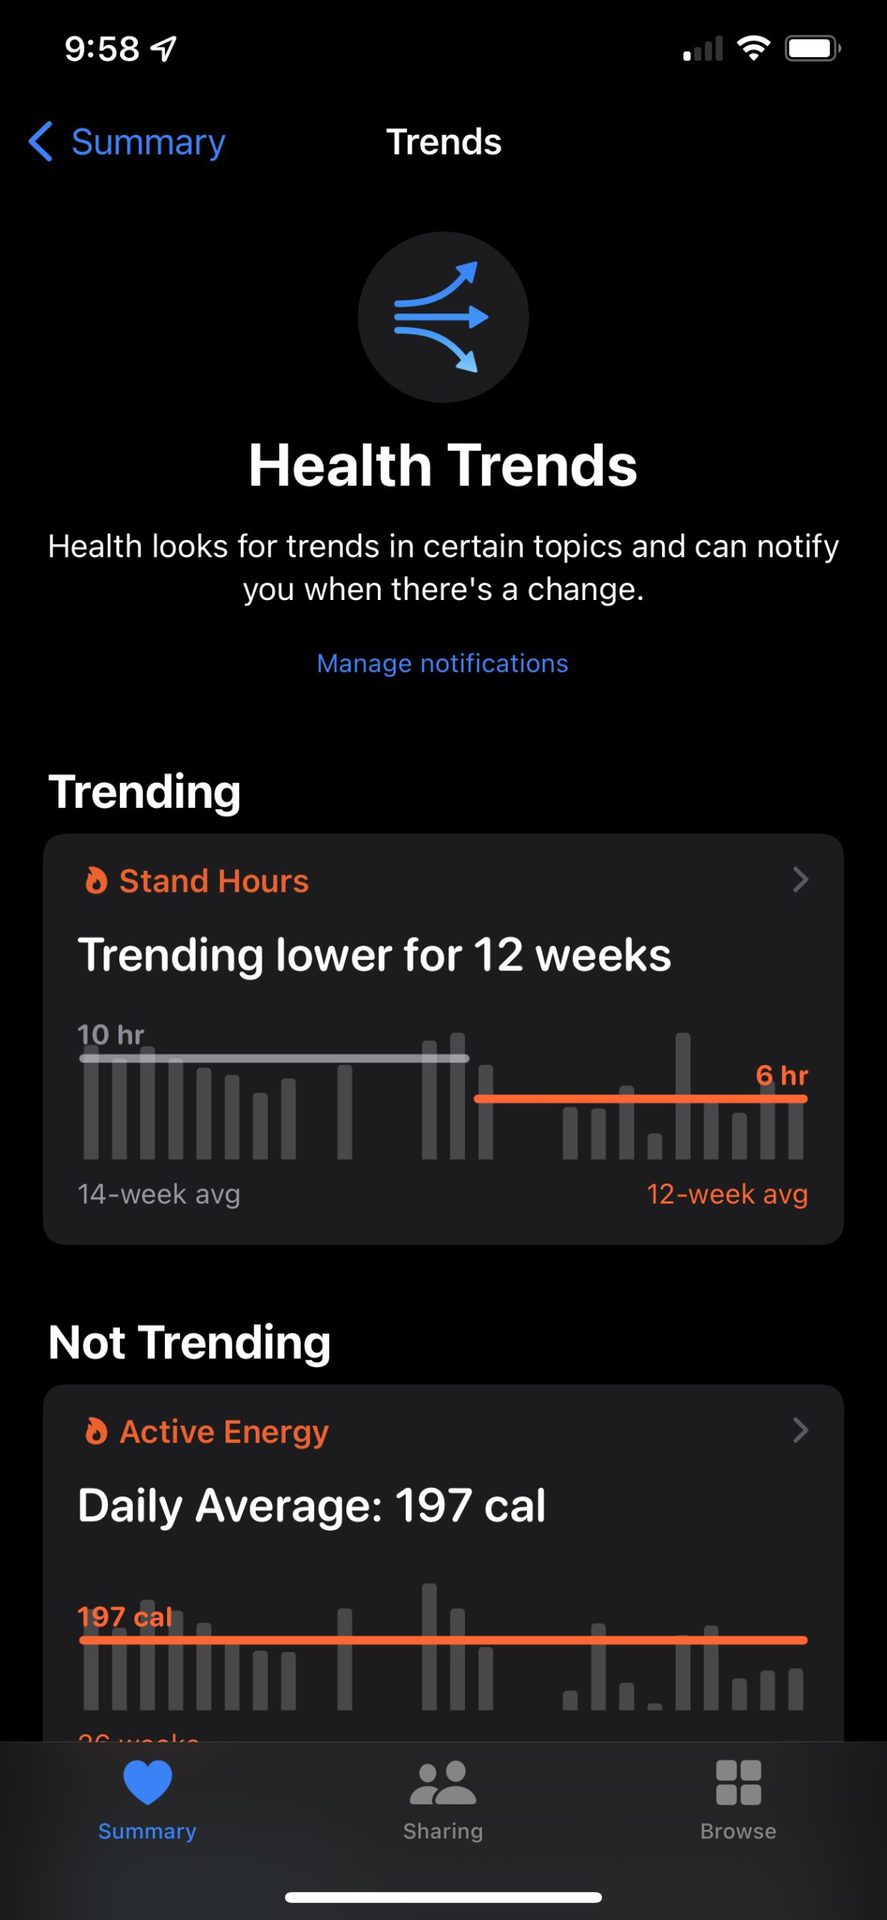 https://www.androidauthority.com/wp-content/uploads/2022/01/Apple-Health-Trends-scaled.jpeg